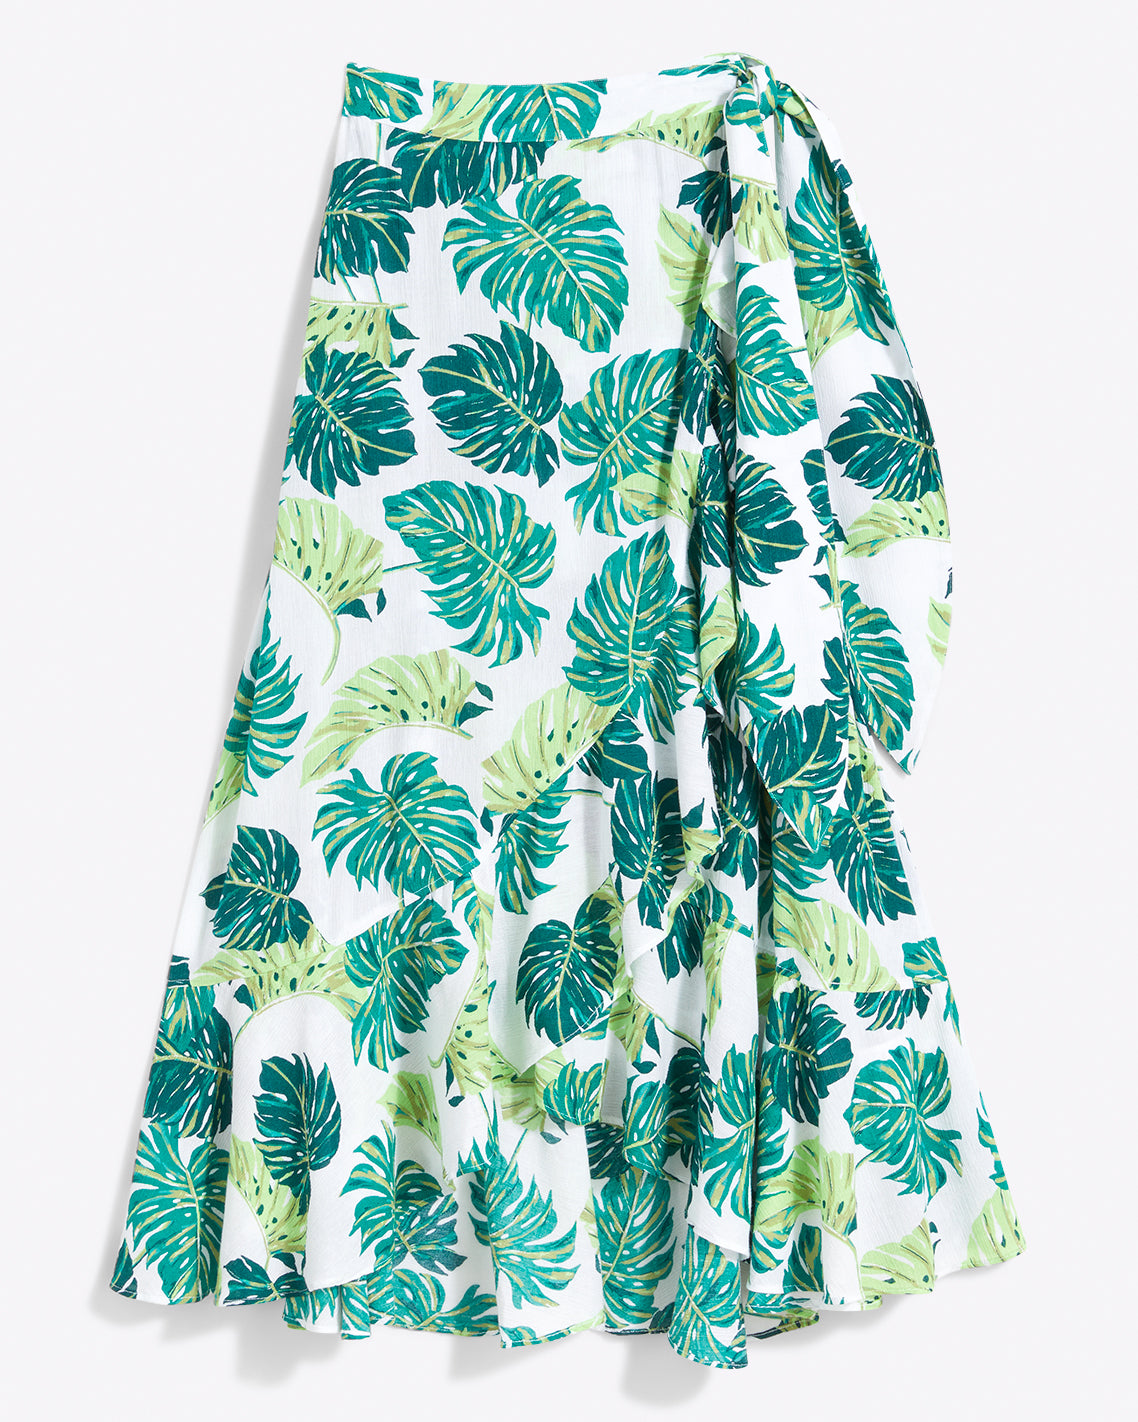 Floral Maxi Skirt in Monstera Floral